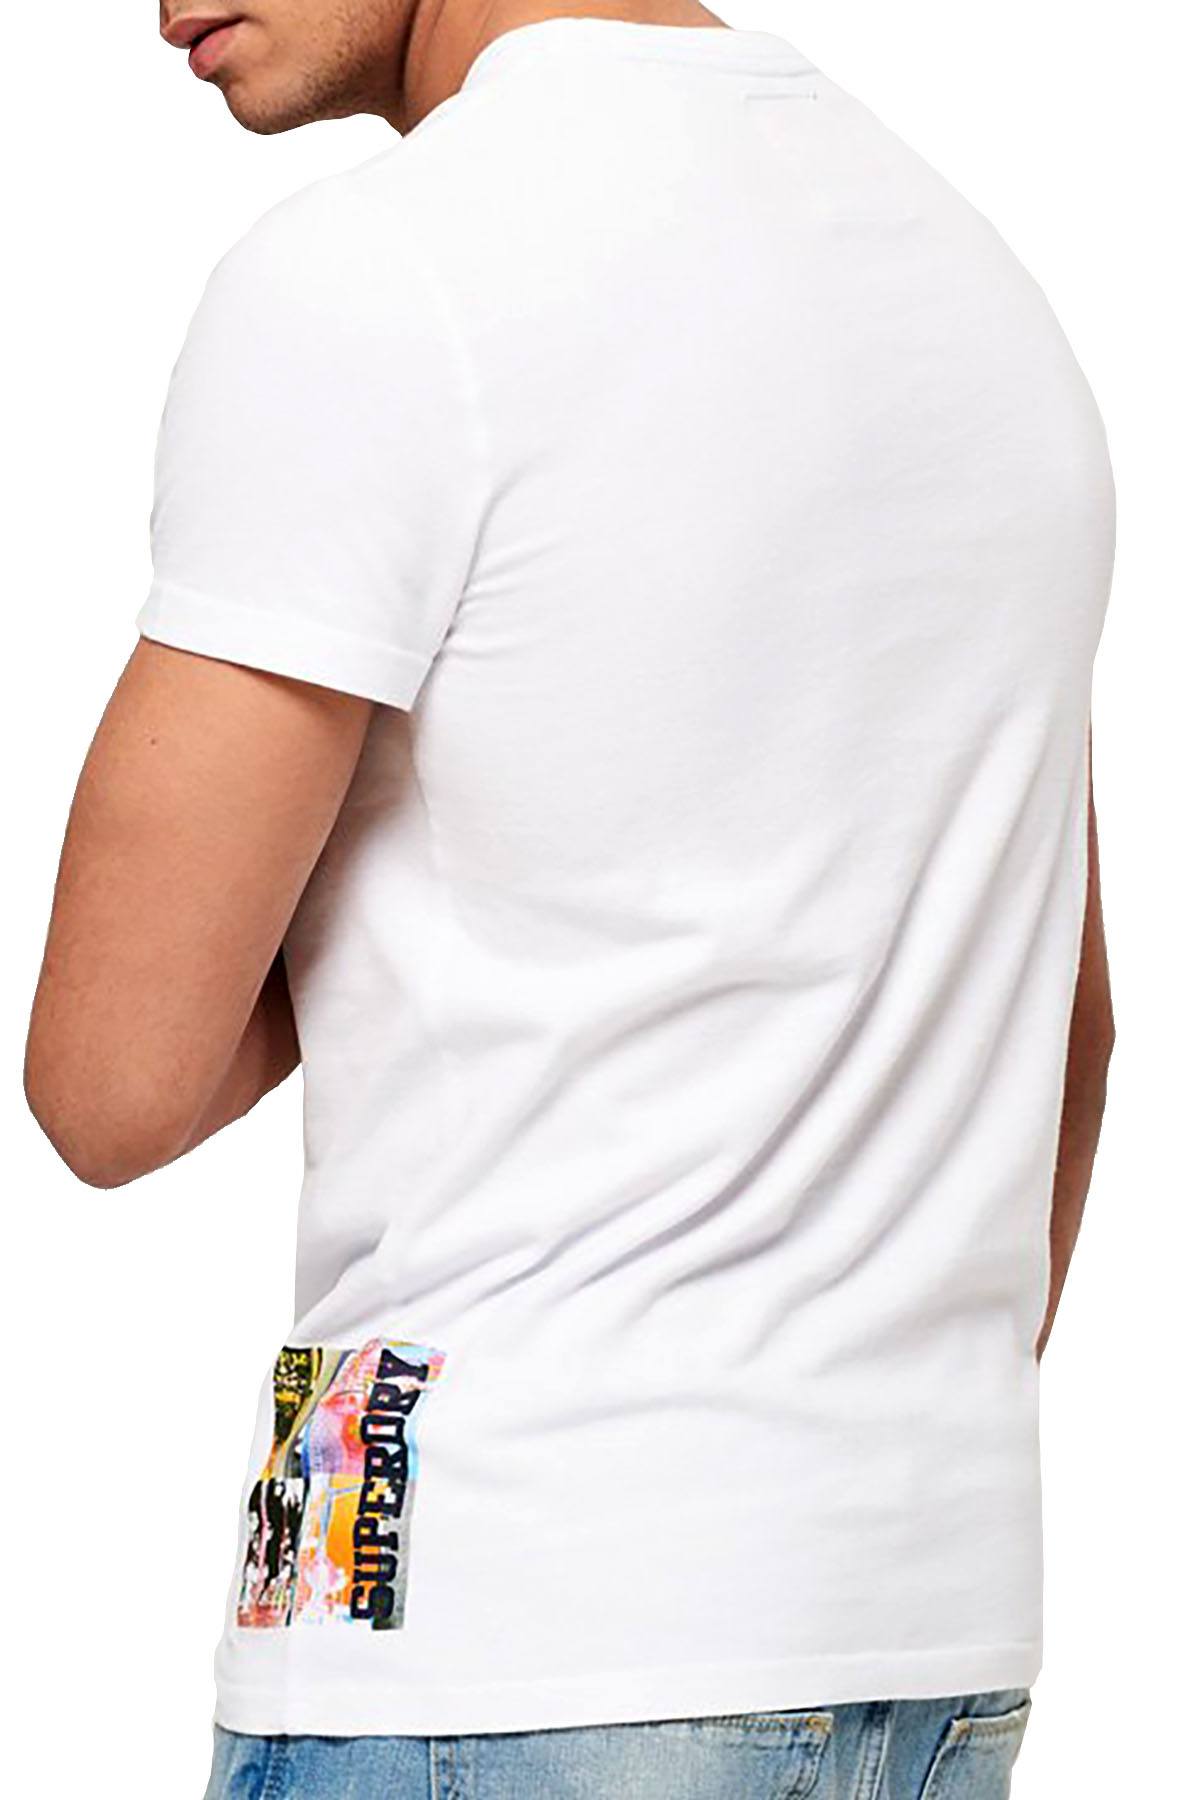 SuperDry Optic-White Ticket Type T-Shirt